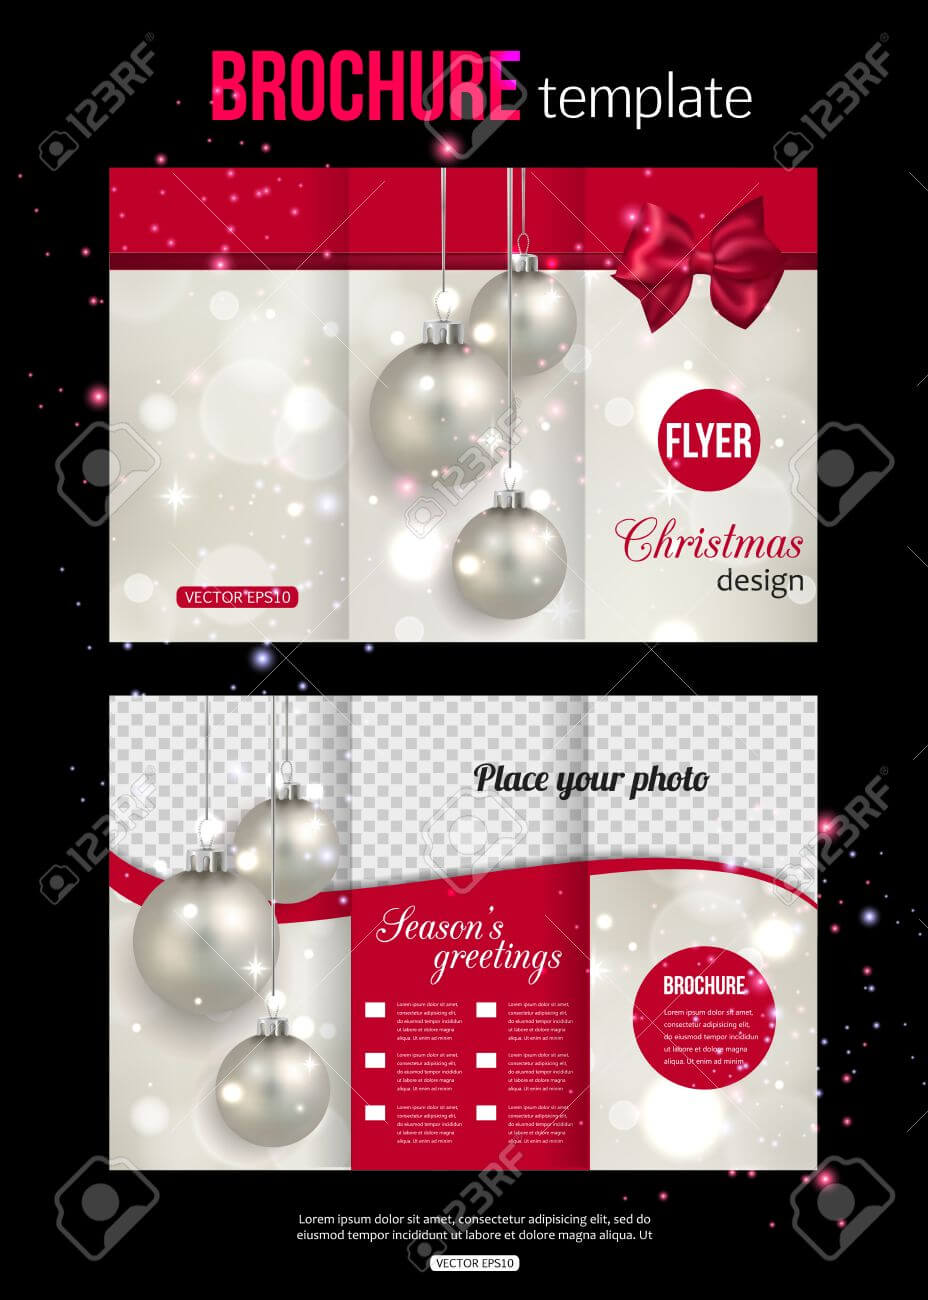 Christmas Trifold Brochure Template. Abstract Flyer Design With.. Intended For Christmas Brochure Templates Free